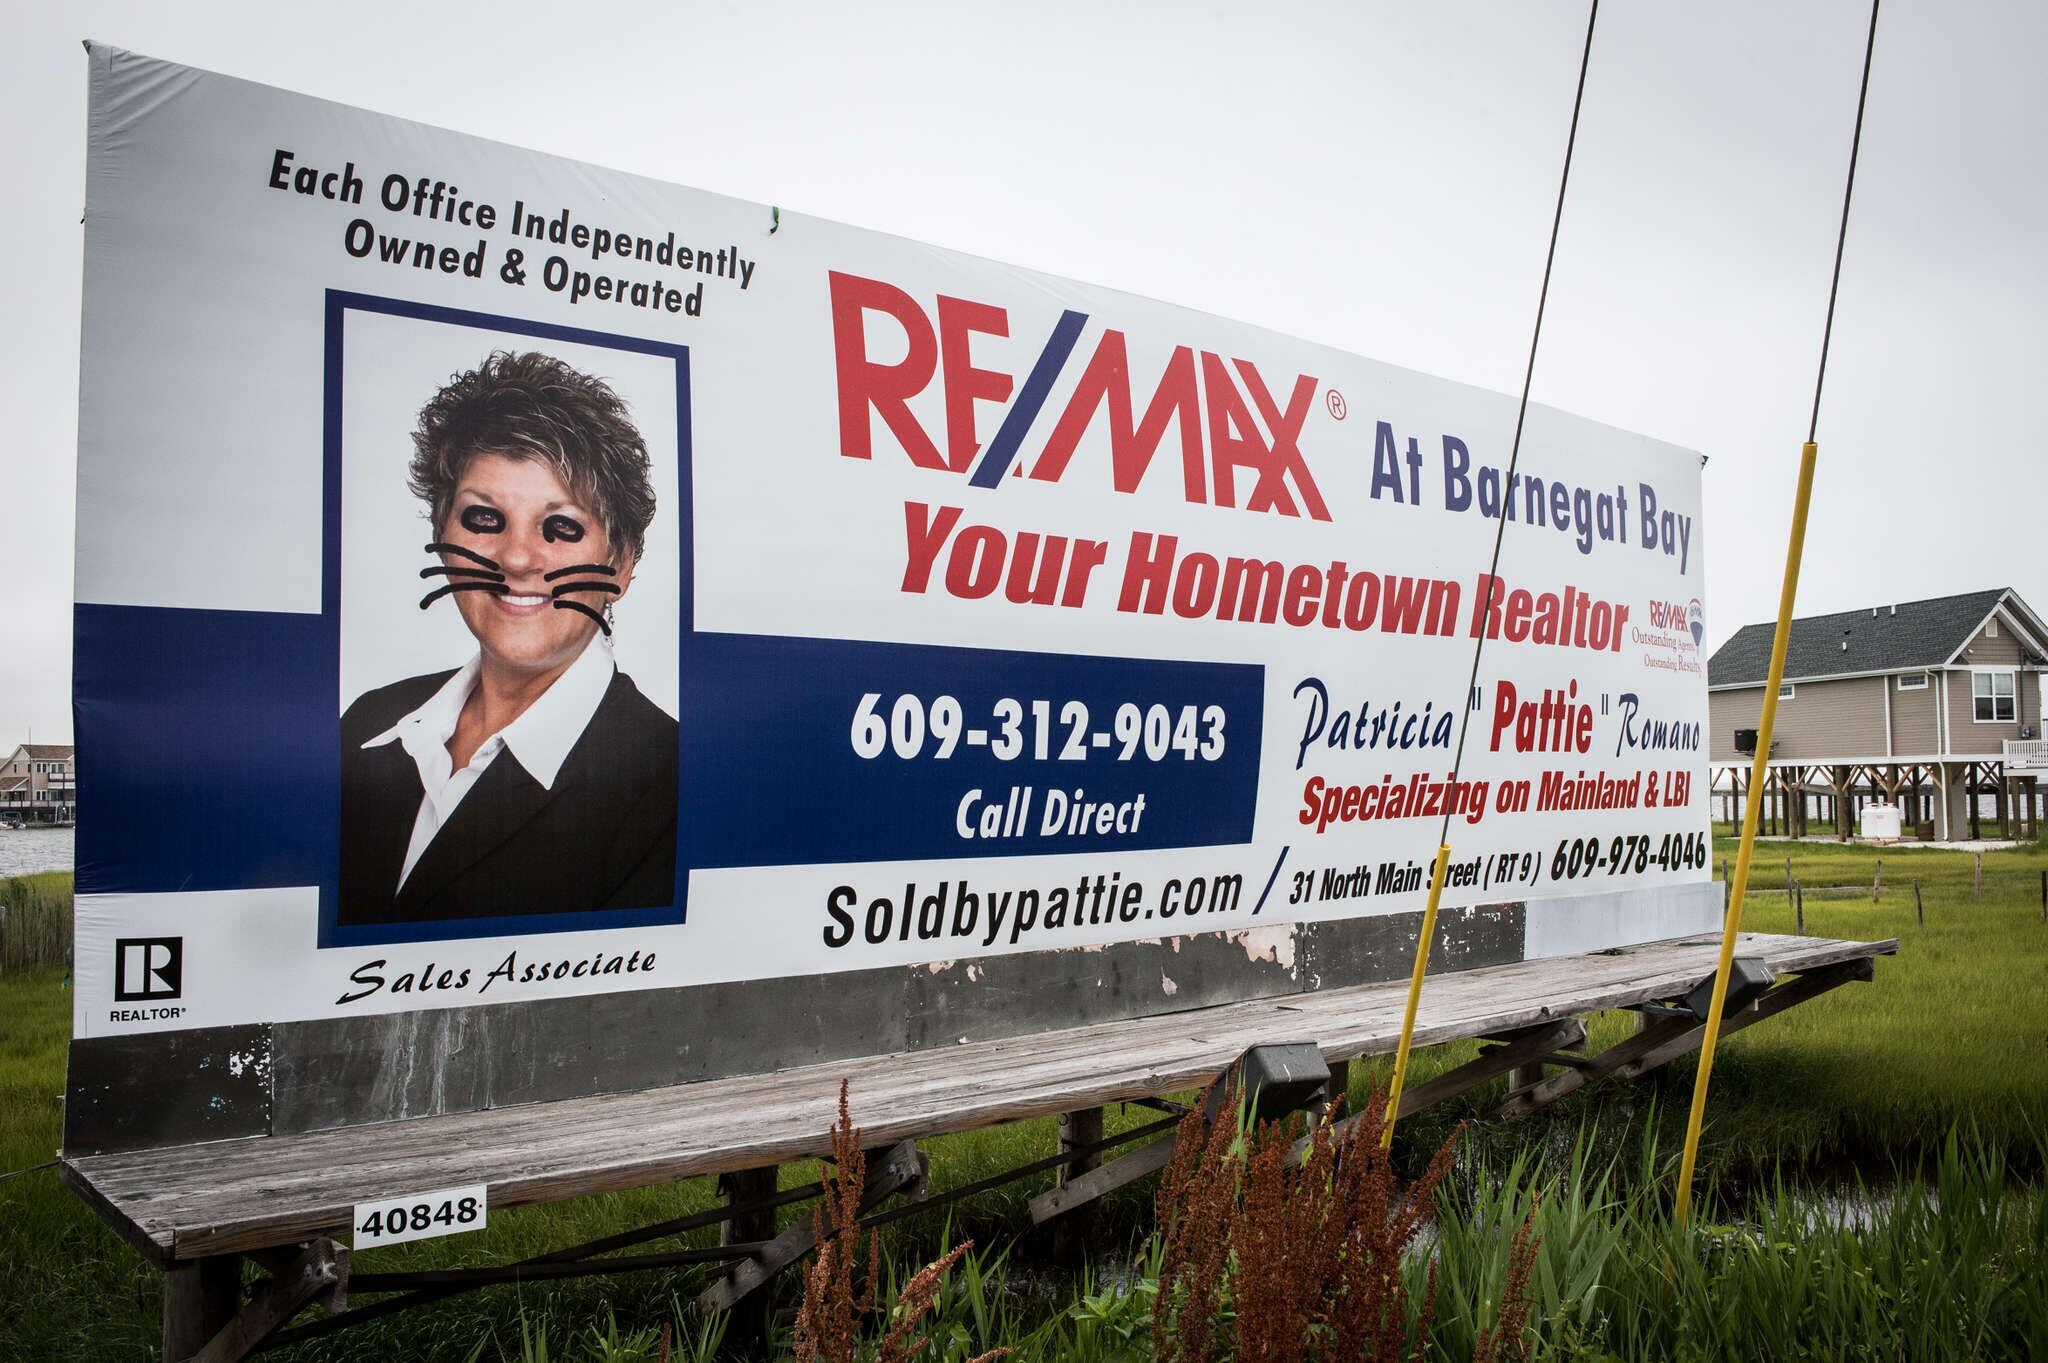 LBI Realtor: I change my billboard photo, why don't the others?